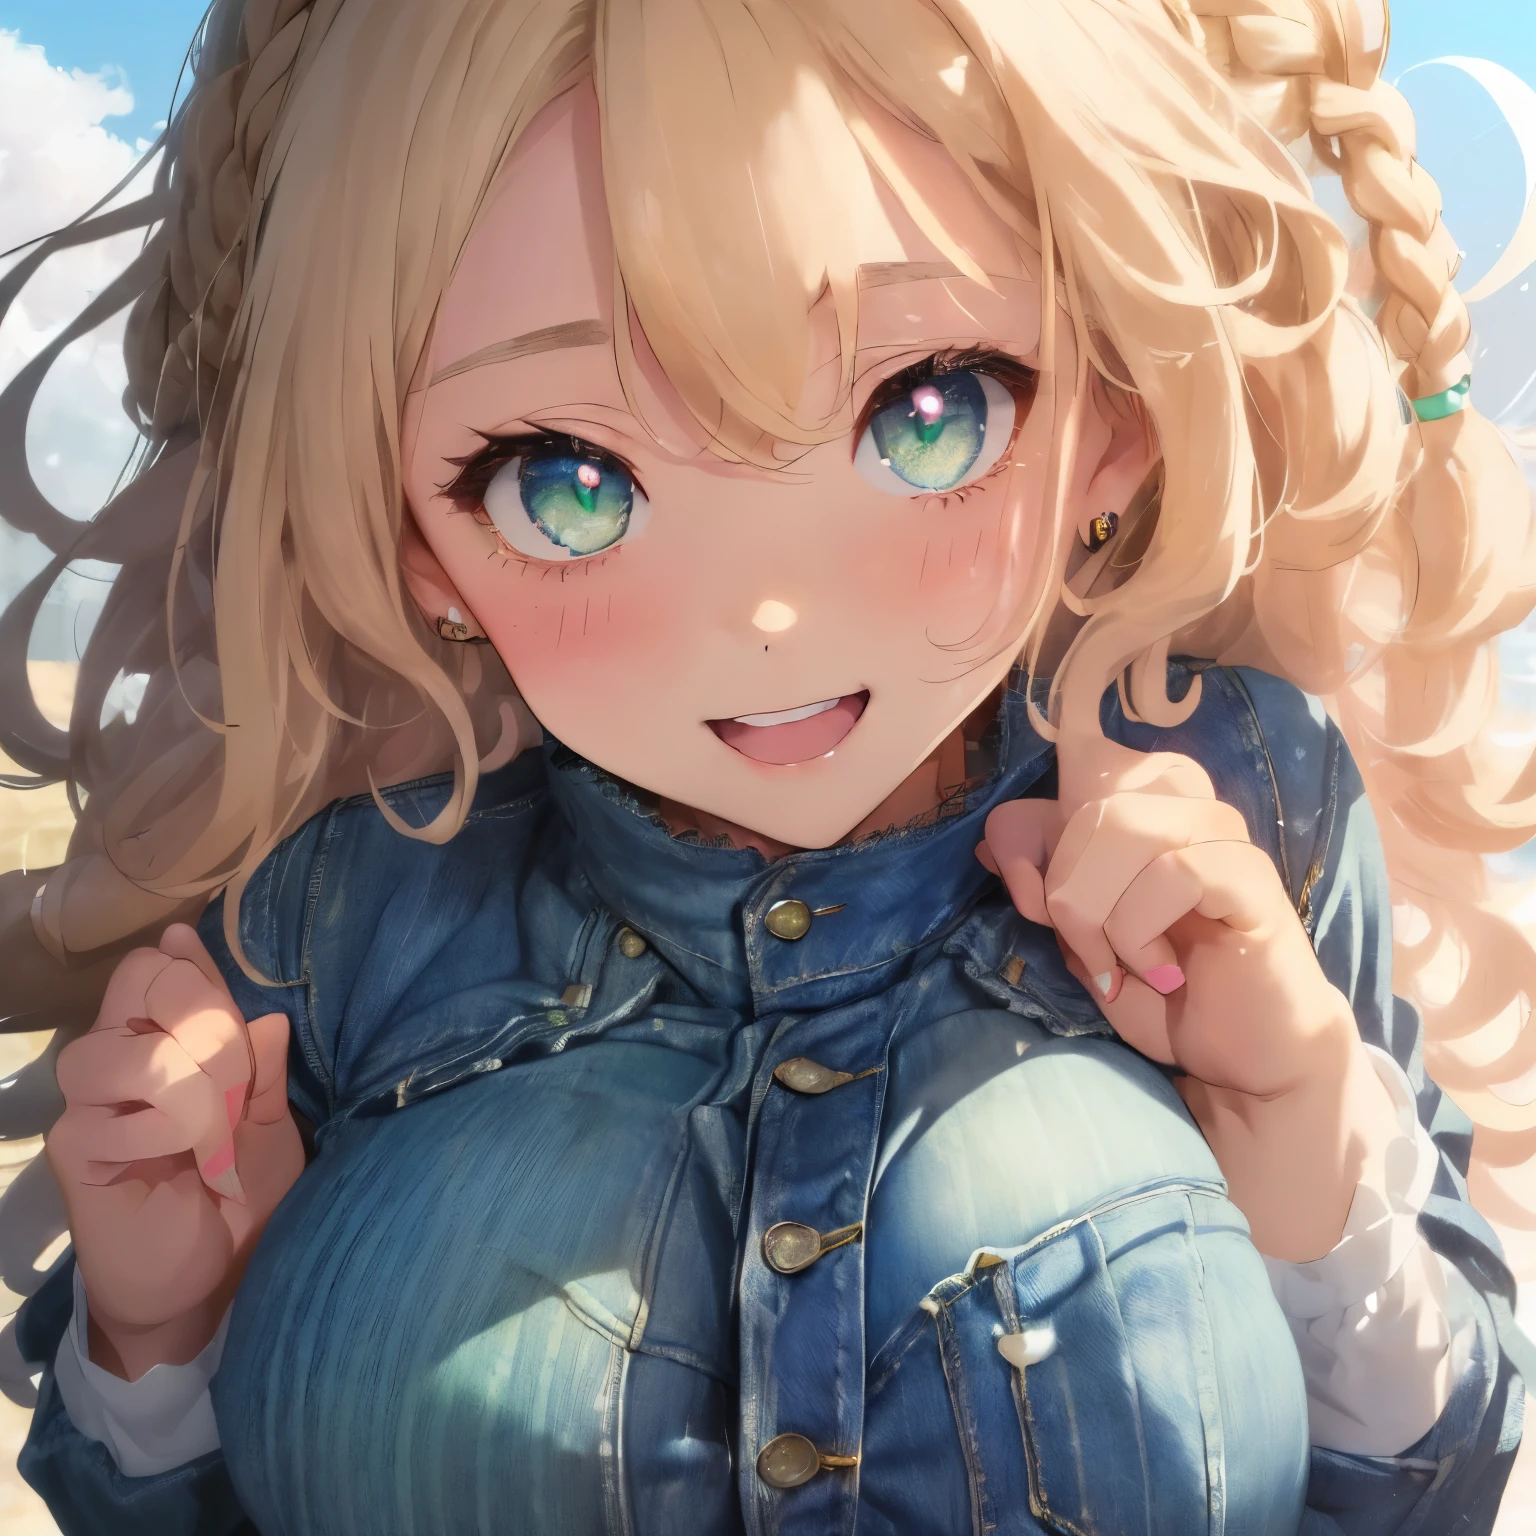 (blonde:1.3),(Curly hair with a lot of fluff:1.4),(braided hair:1.3),(With bangs),(pink eyes:1.25),Slight red tide,(Beautiful breasts spilling out of clothes:1.3),(The eyes are shining brightly:1.2),(eye size:1.7),(Commemorative photo style:1.3),(Looking at camera with a smile:1.25),(smiling with open mouth:1.2),(soft sunlight:1.3),(A soft atmosphere in the sky:1.25),(hair blowing in the wind:1.3),(soft smile:1.3),(cute pose:1.4),(striped long sleeve clothes:1.35),(clothes with lace:1.3),(Volume shorts made of denim material:1.35),(close up of face:1.4),(white, light blue and yellow green),(jump:1.5),